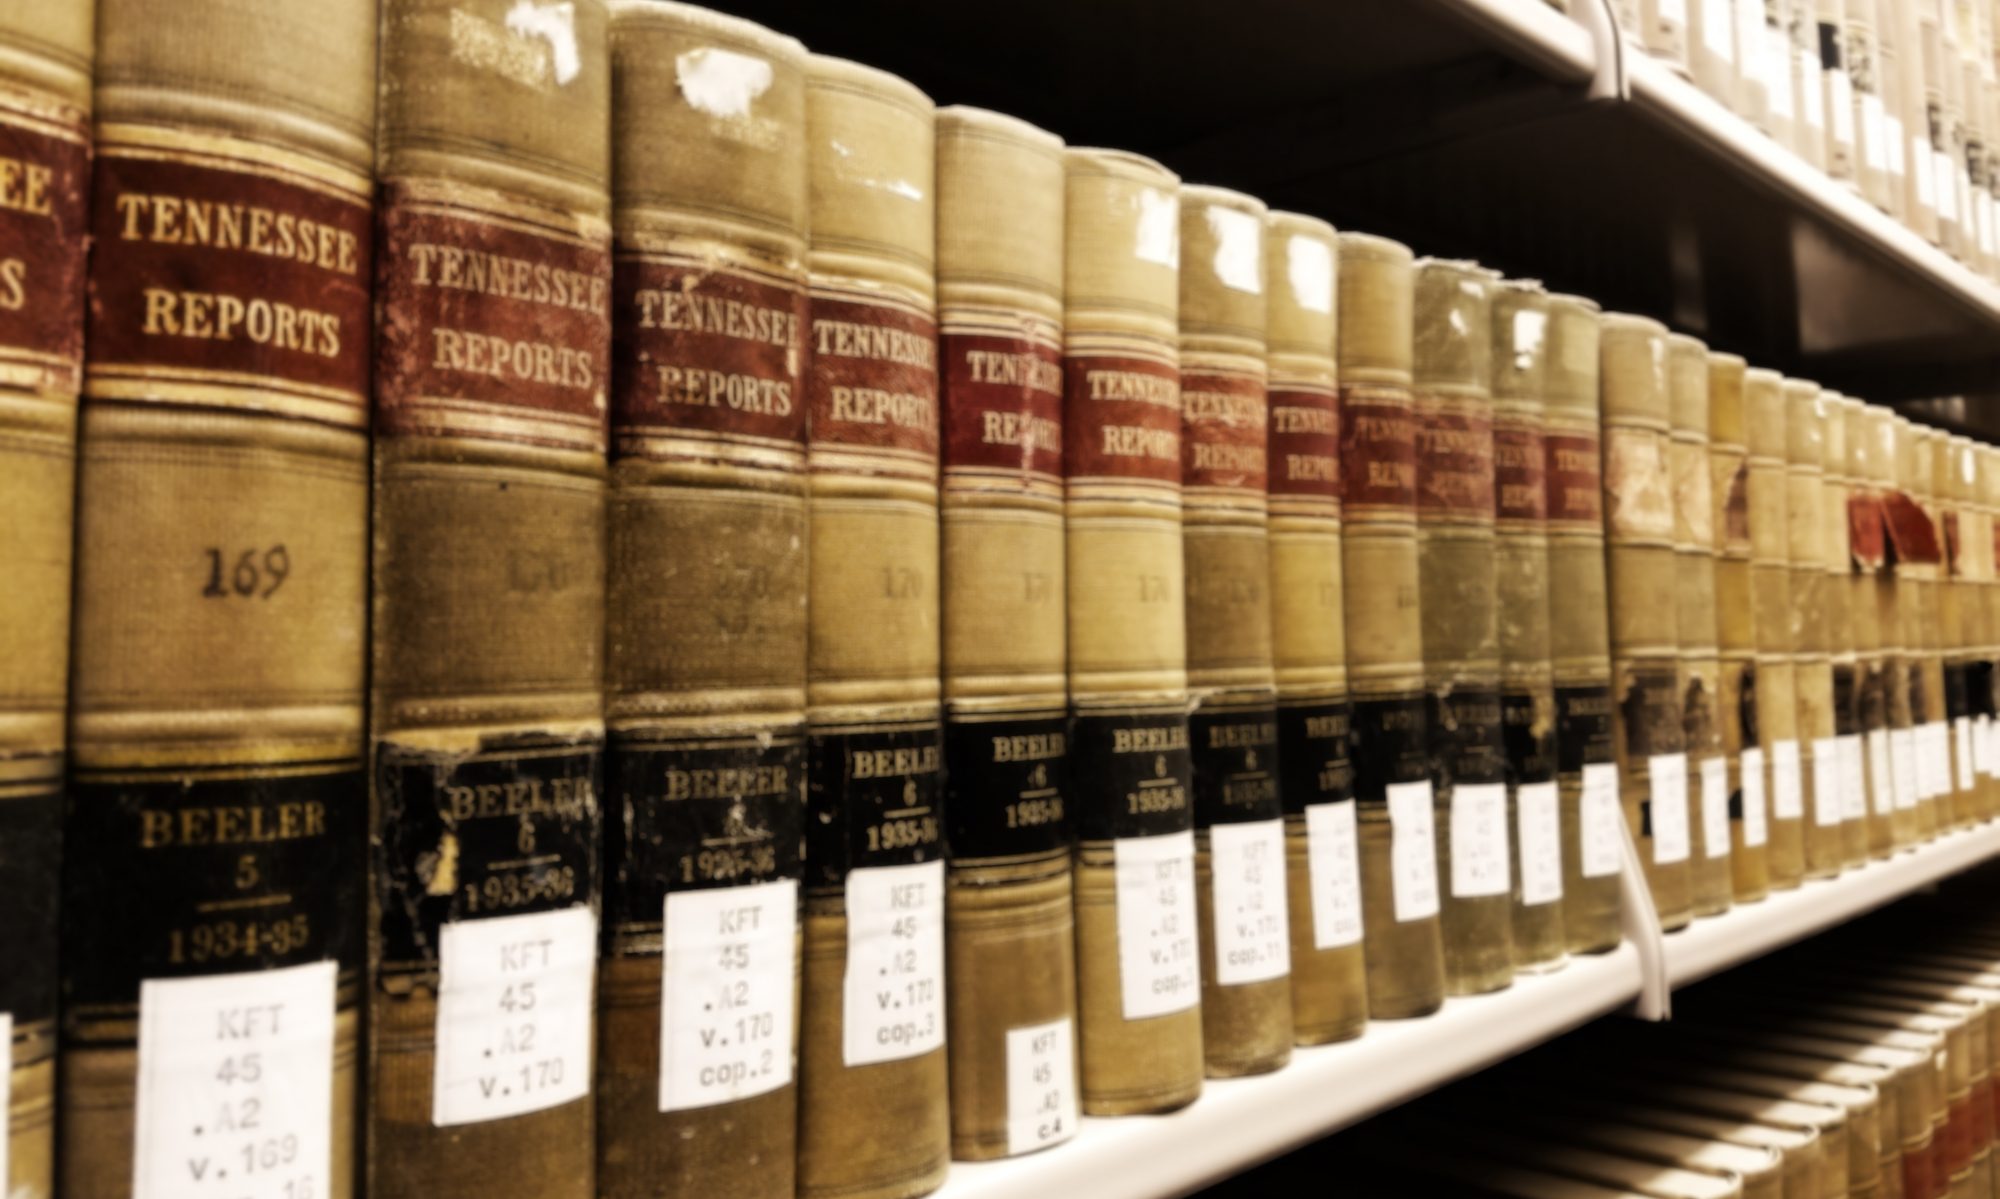 Tennessee laws and details of the criminal system can be found in library books